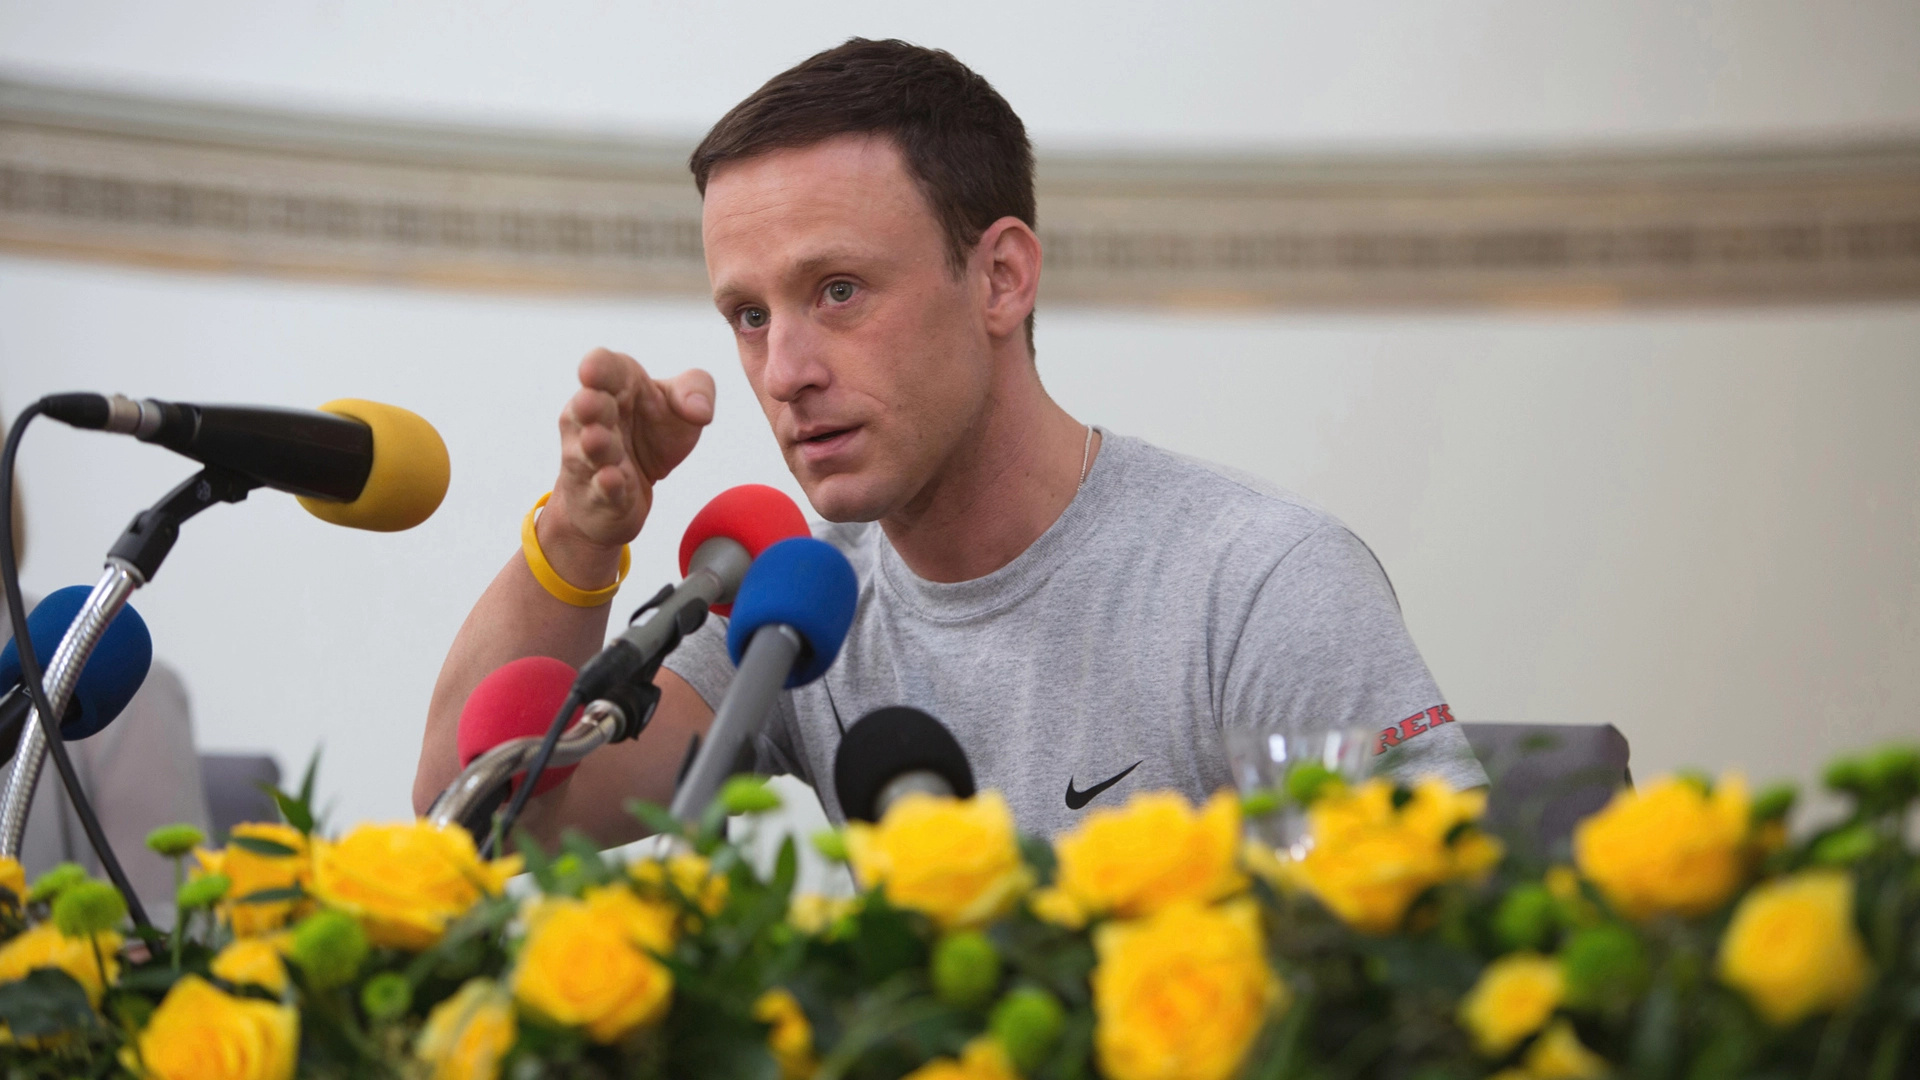 Ben Foster portrays Lance Armstrong, The Program, Multi-dimensional character, Variety, 1920x1080 Full HD Desktop